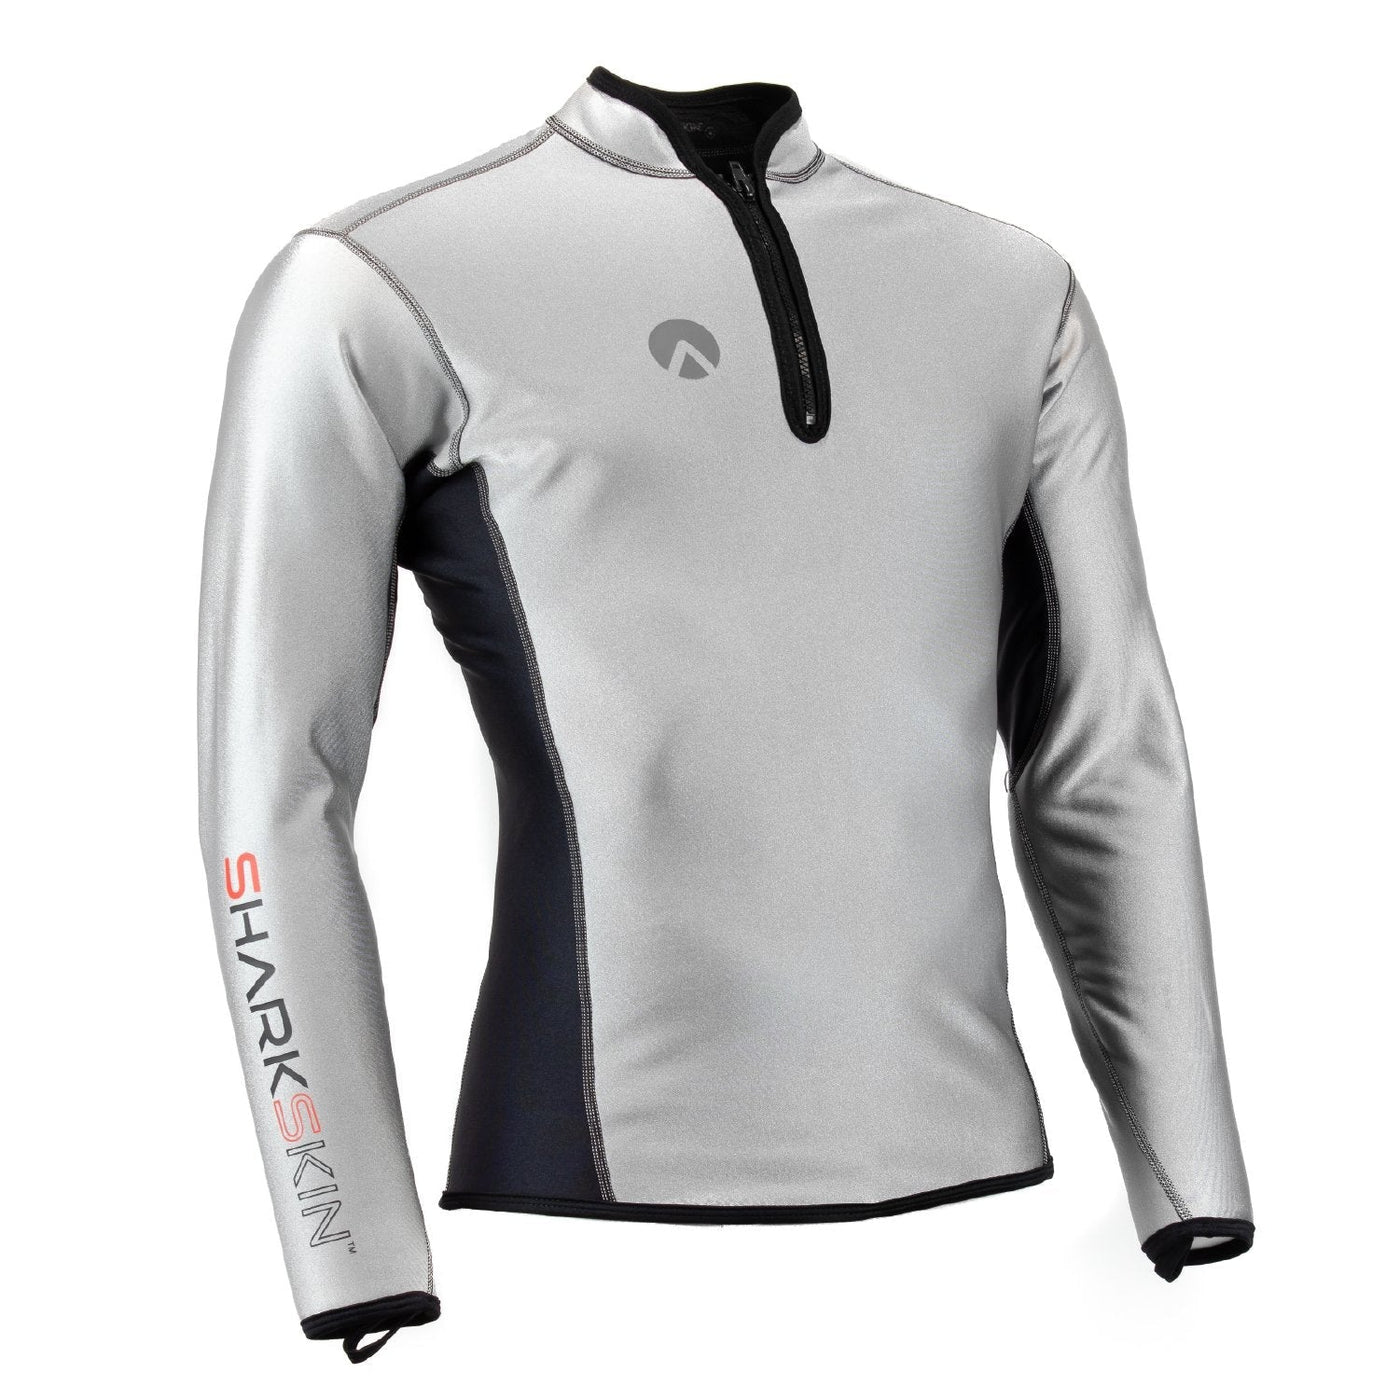 CHILLPROOF LONG SLEEVE CHEST ZIP - Mens (SECONDS)